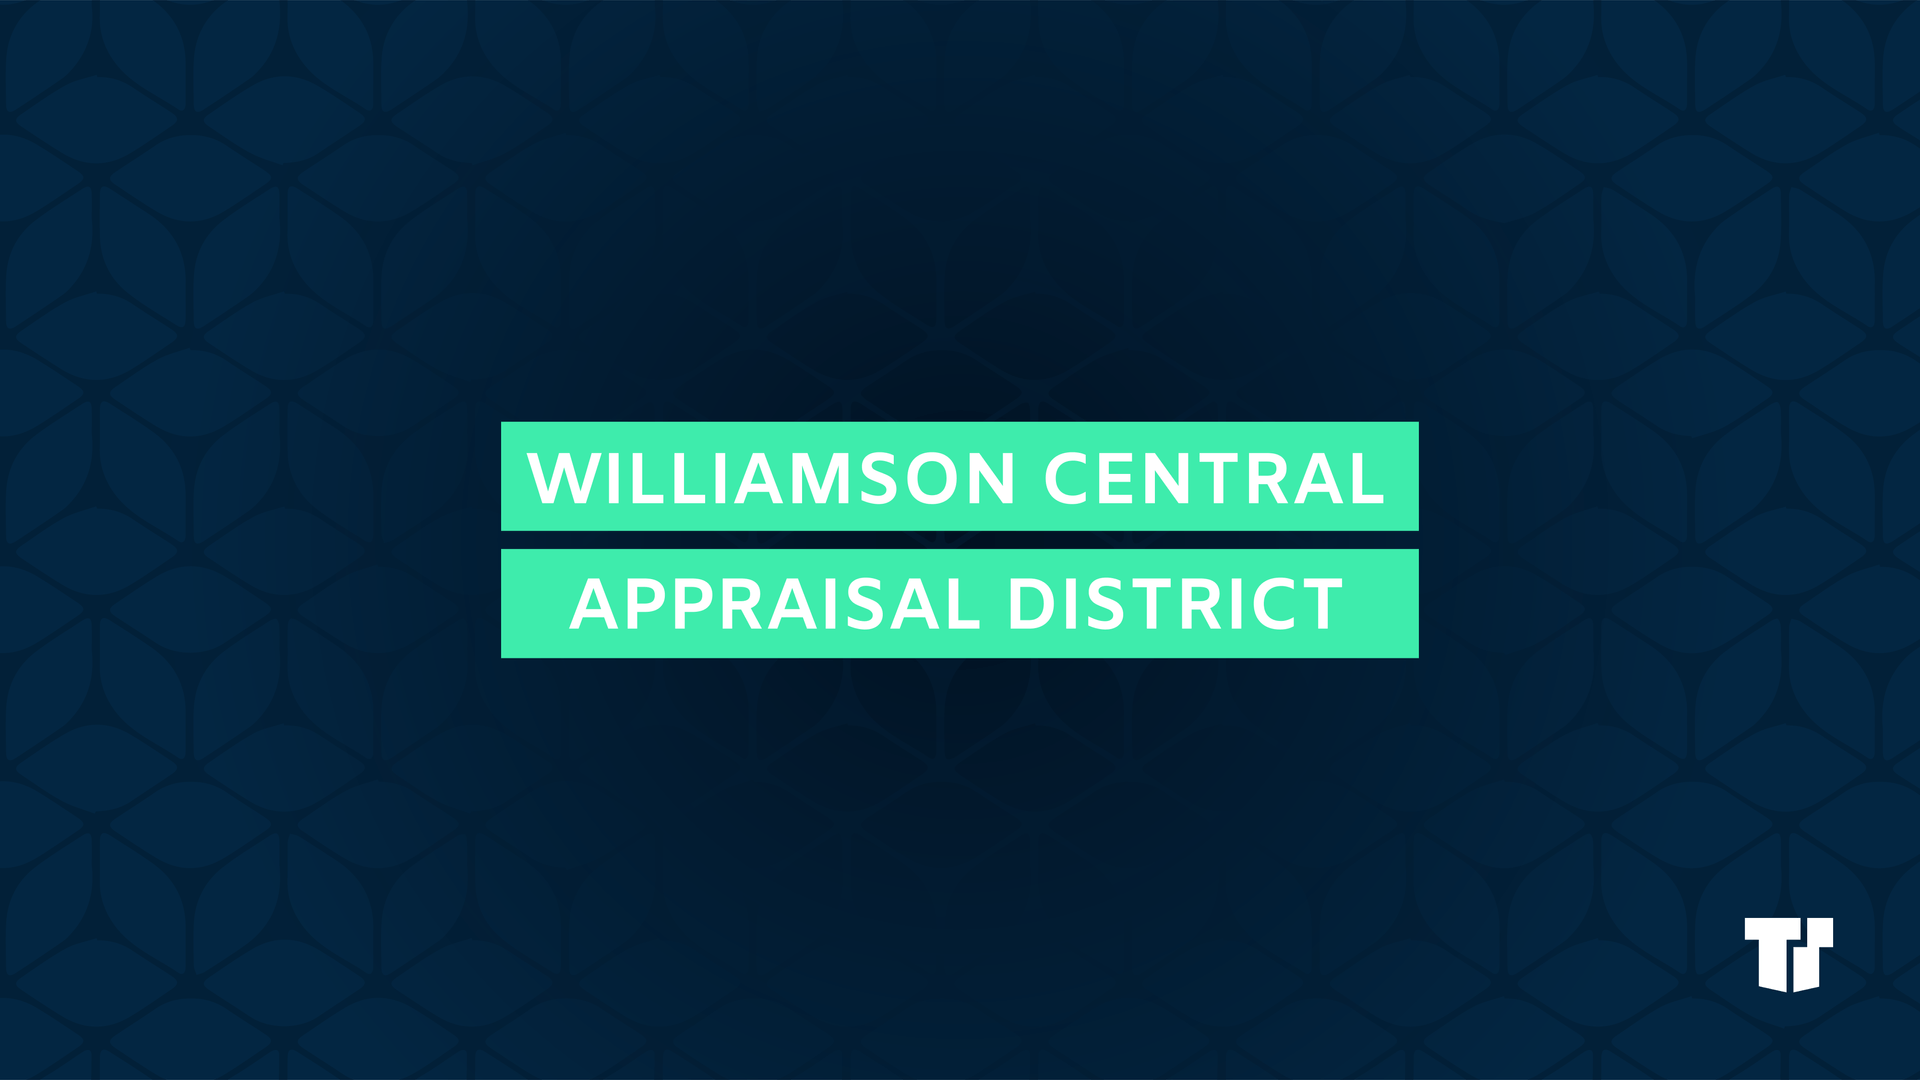 Williamson Central Appraisal District cover image